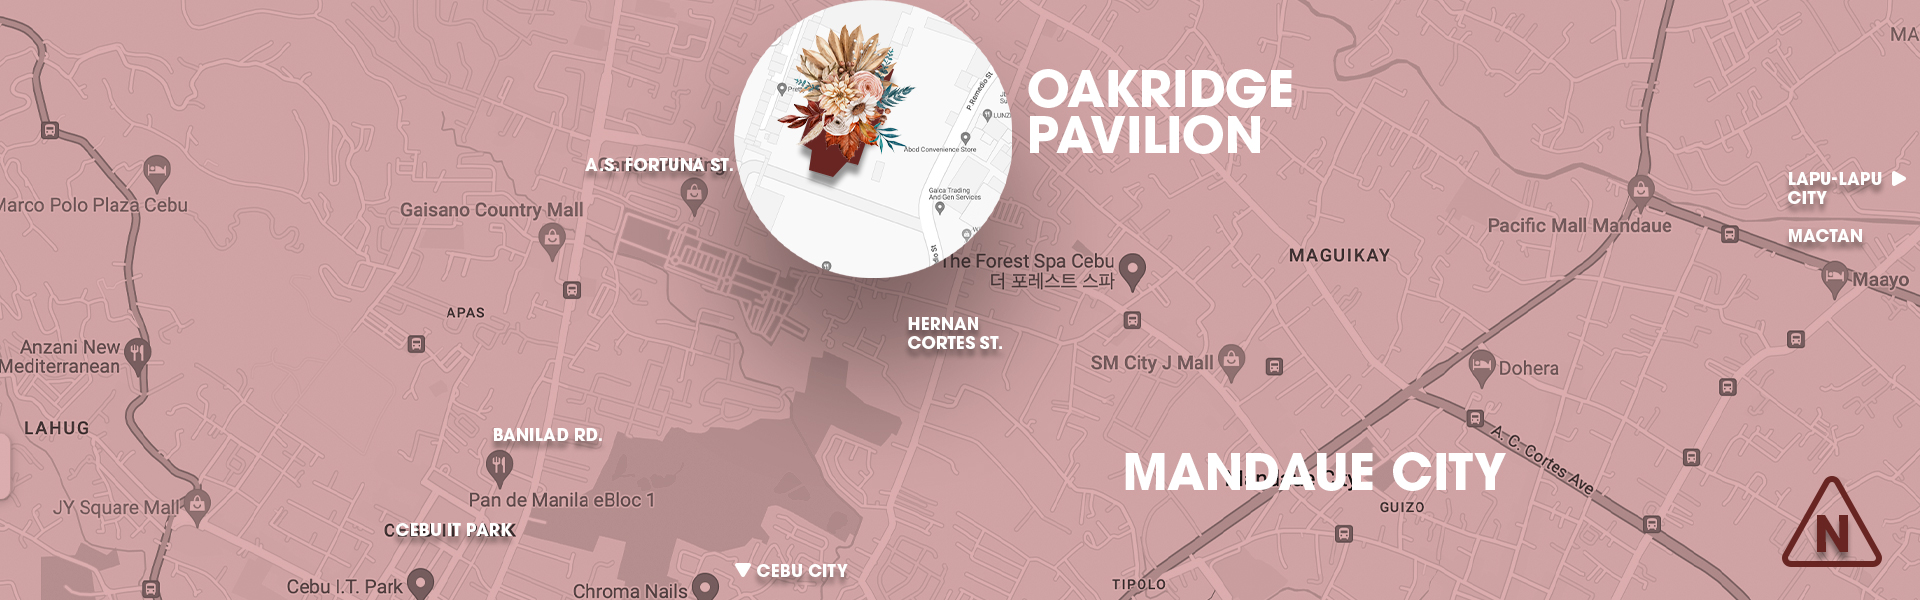 Click for directions to Oakridge Pavilion. See you soon!